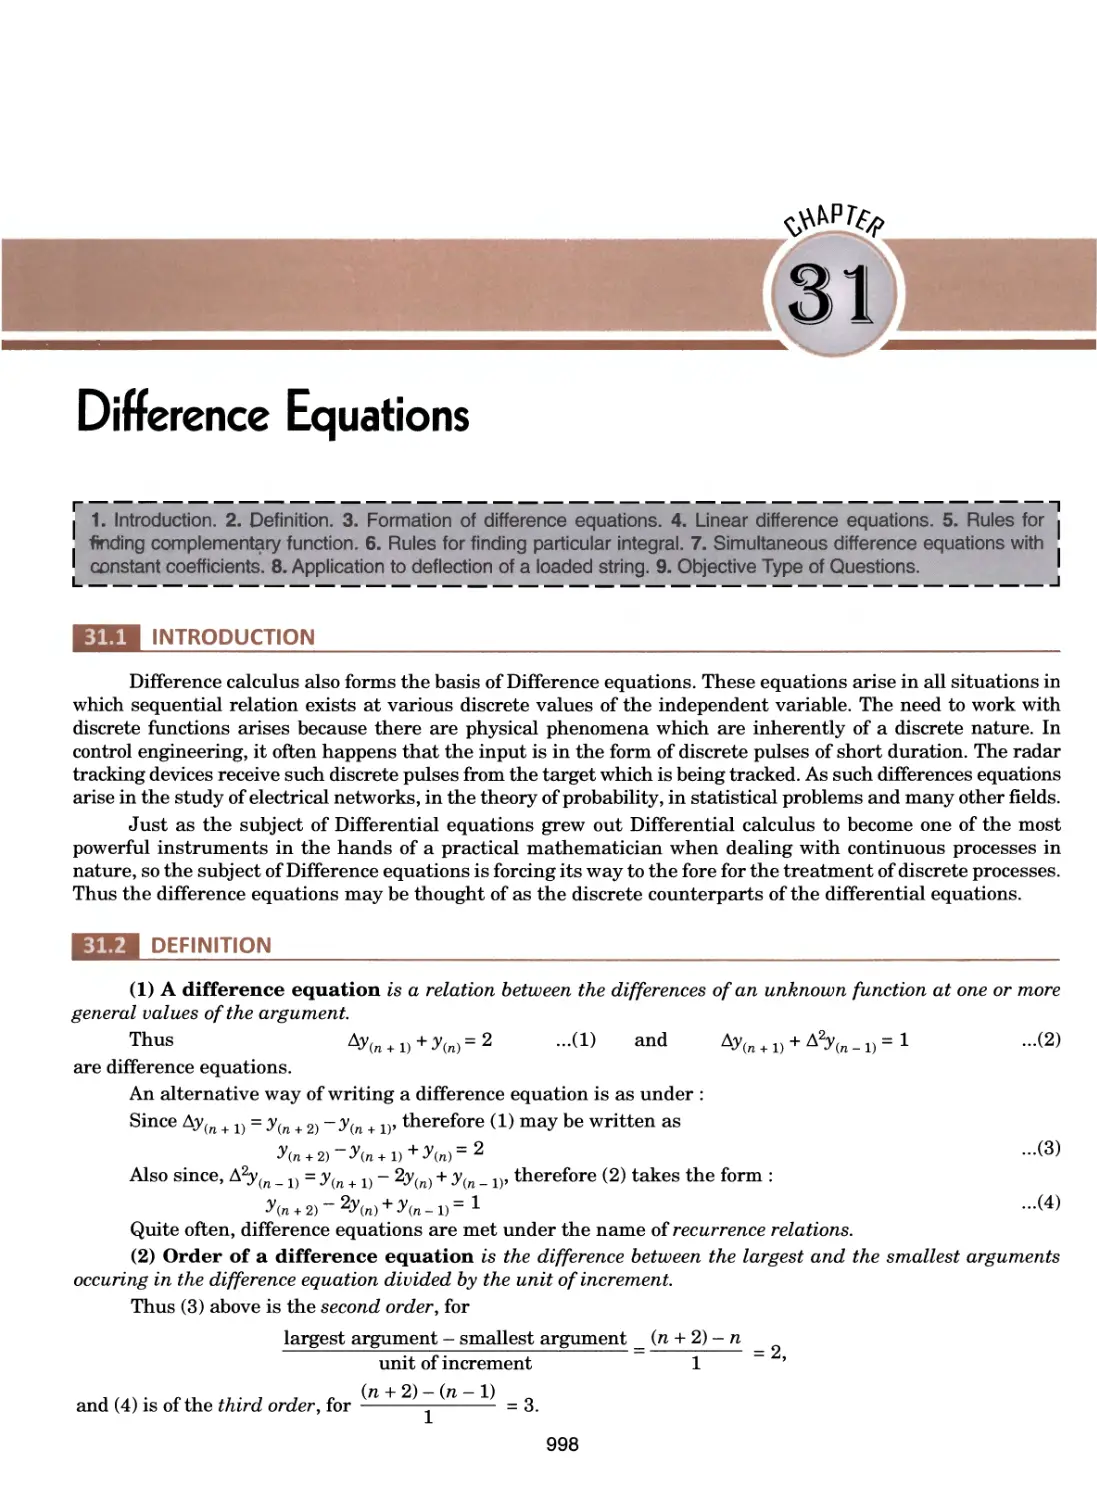 31.Difference Equations 998